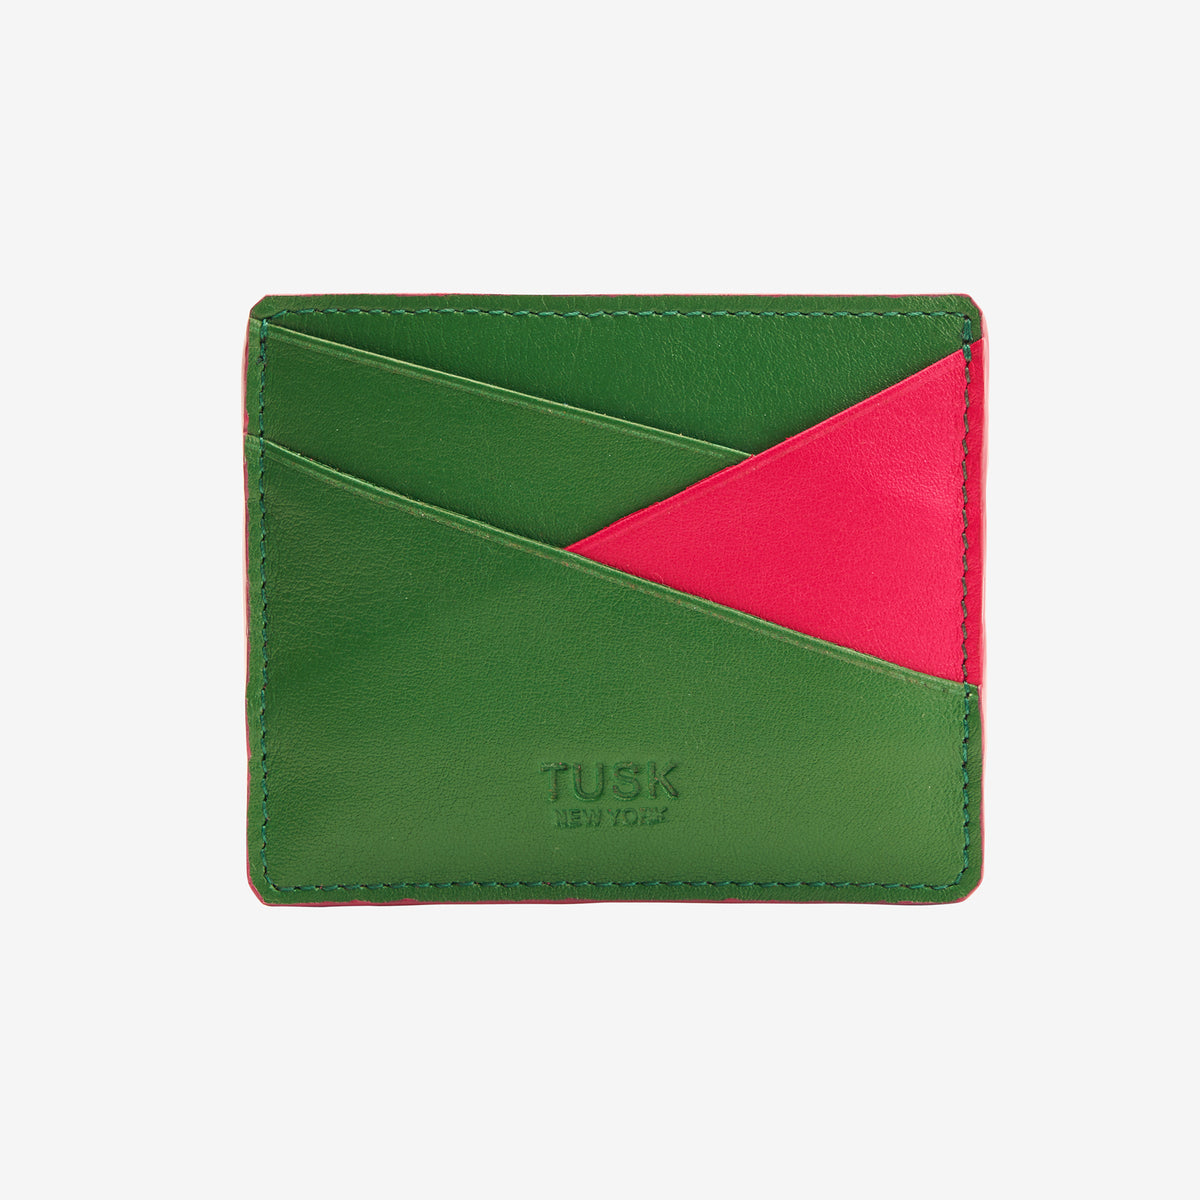     tusk-189-womens-leather-card-case-emerald-and-geranium-front